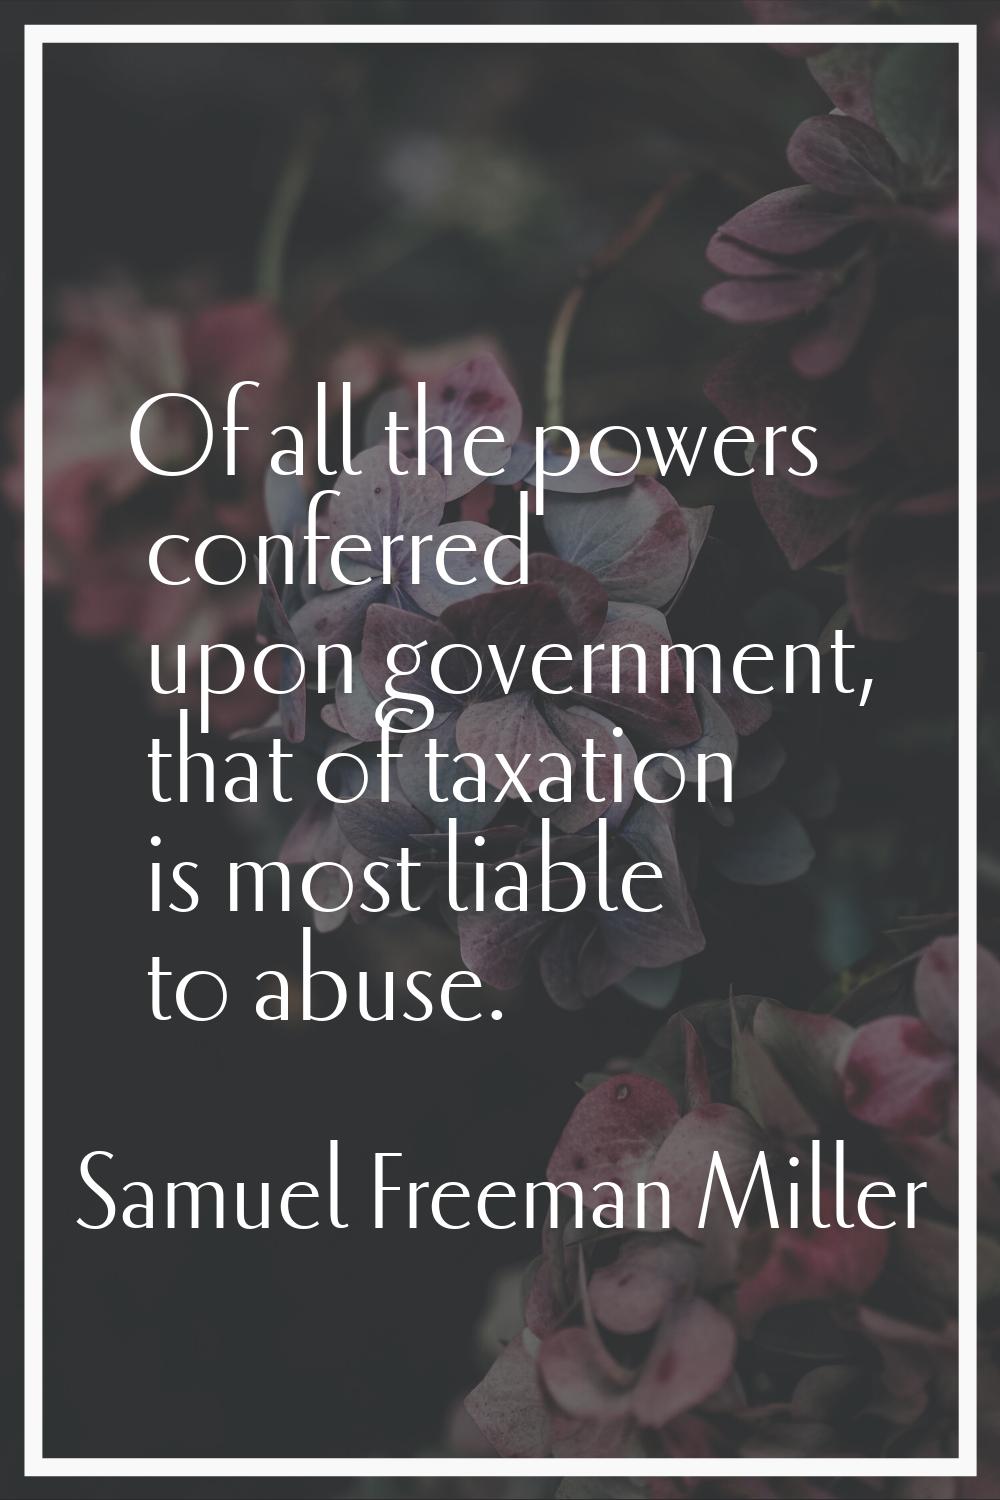 Of all the powers conferred upon government, that of taxation is most liable to abuse.